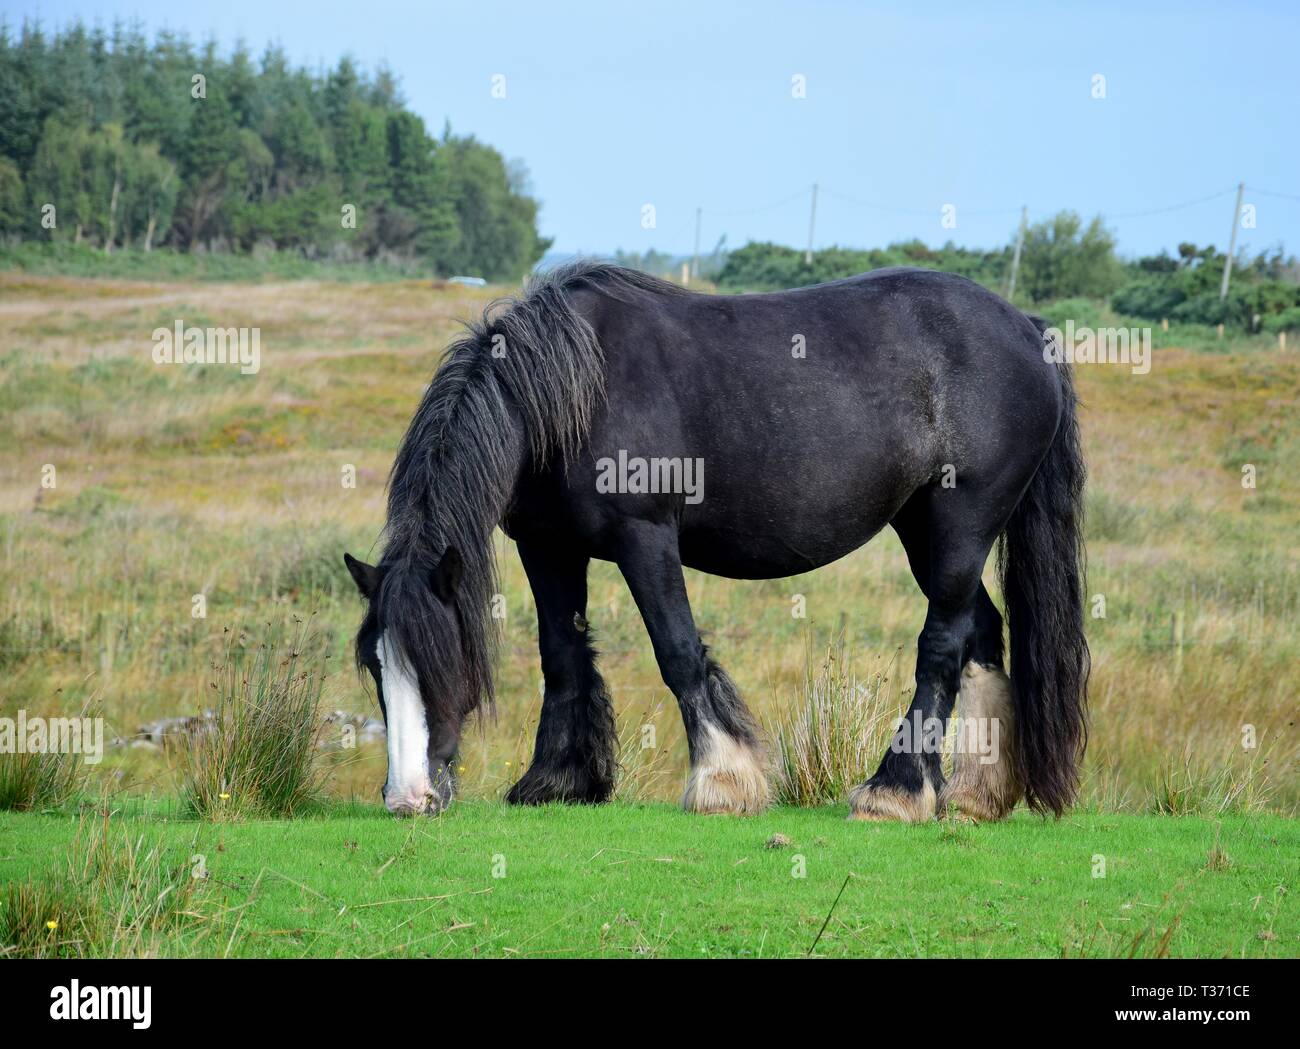 Grazing black horse in Ireland. Landscape in the background. Stock Photo